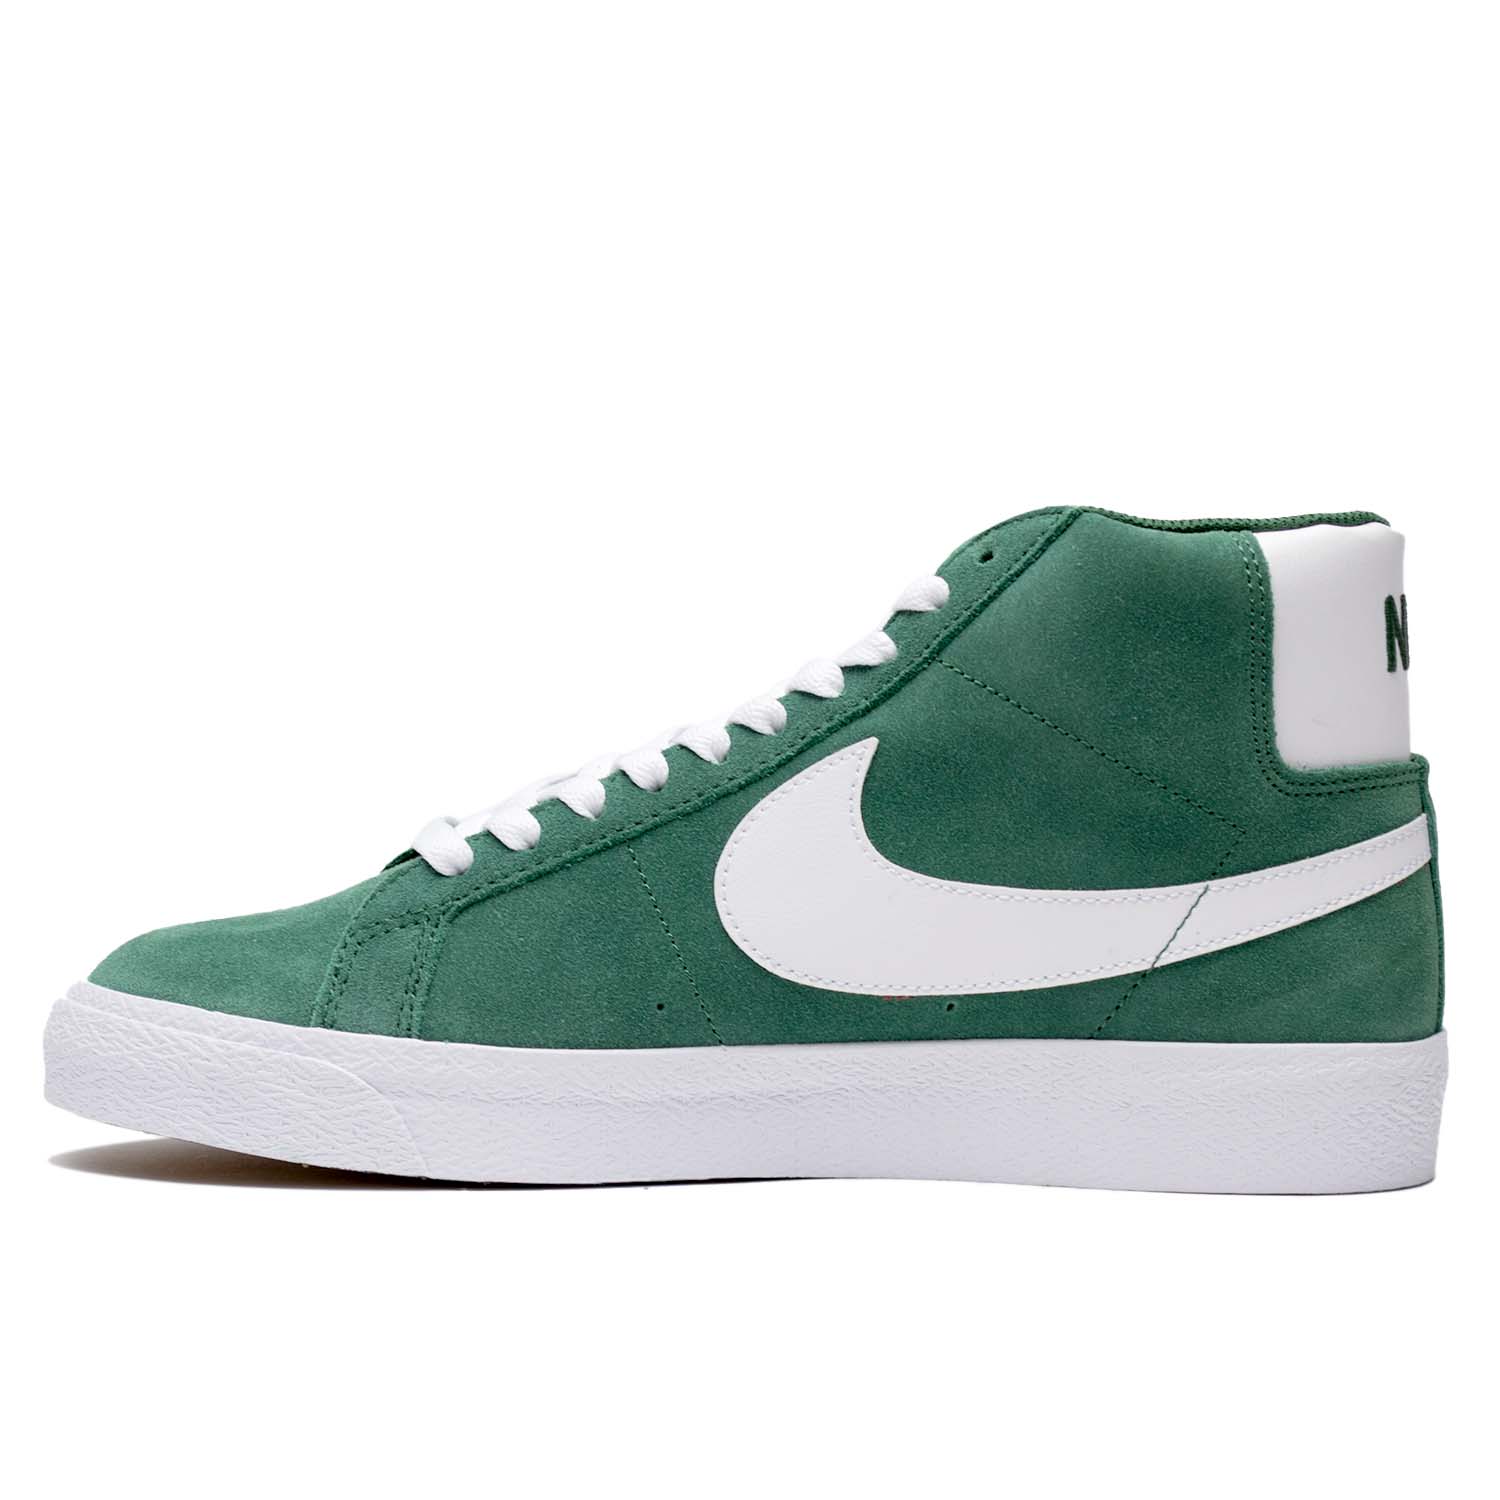 Nike Green suede high top skateboarding shoe with white Nike swoosh, white laces, and white sole. 